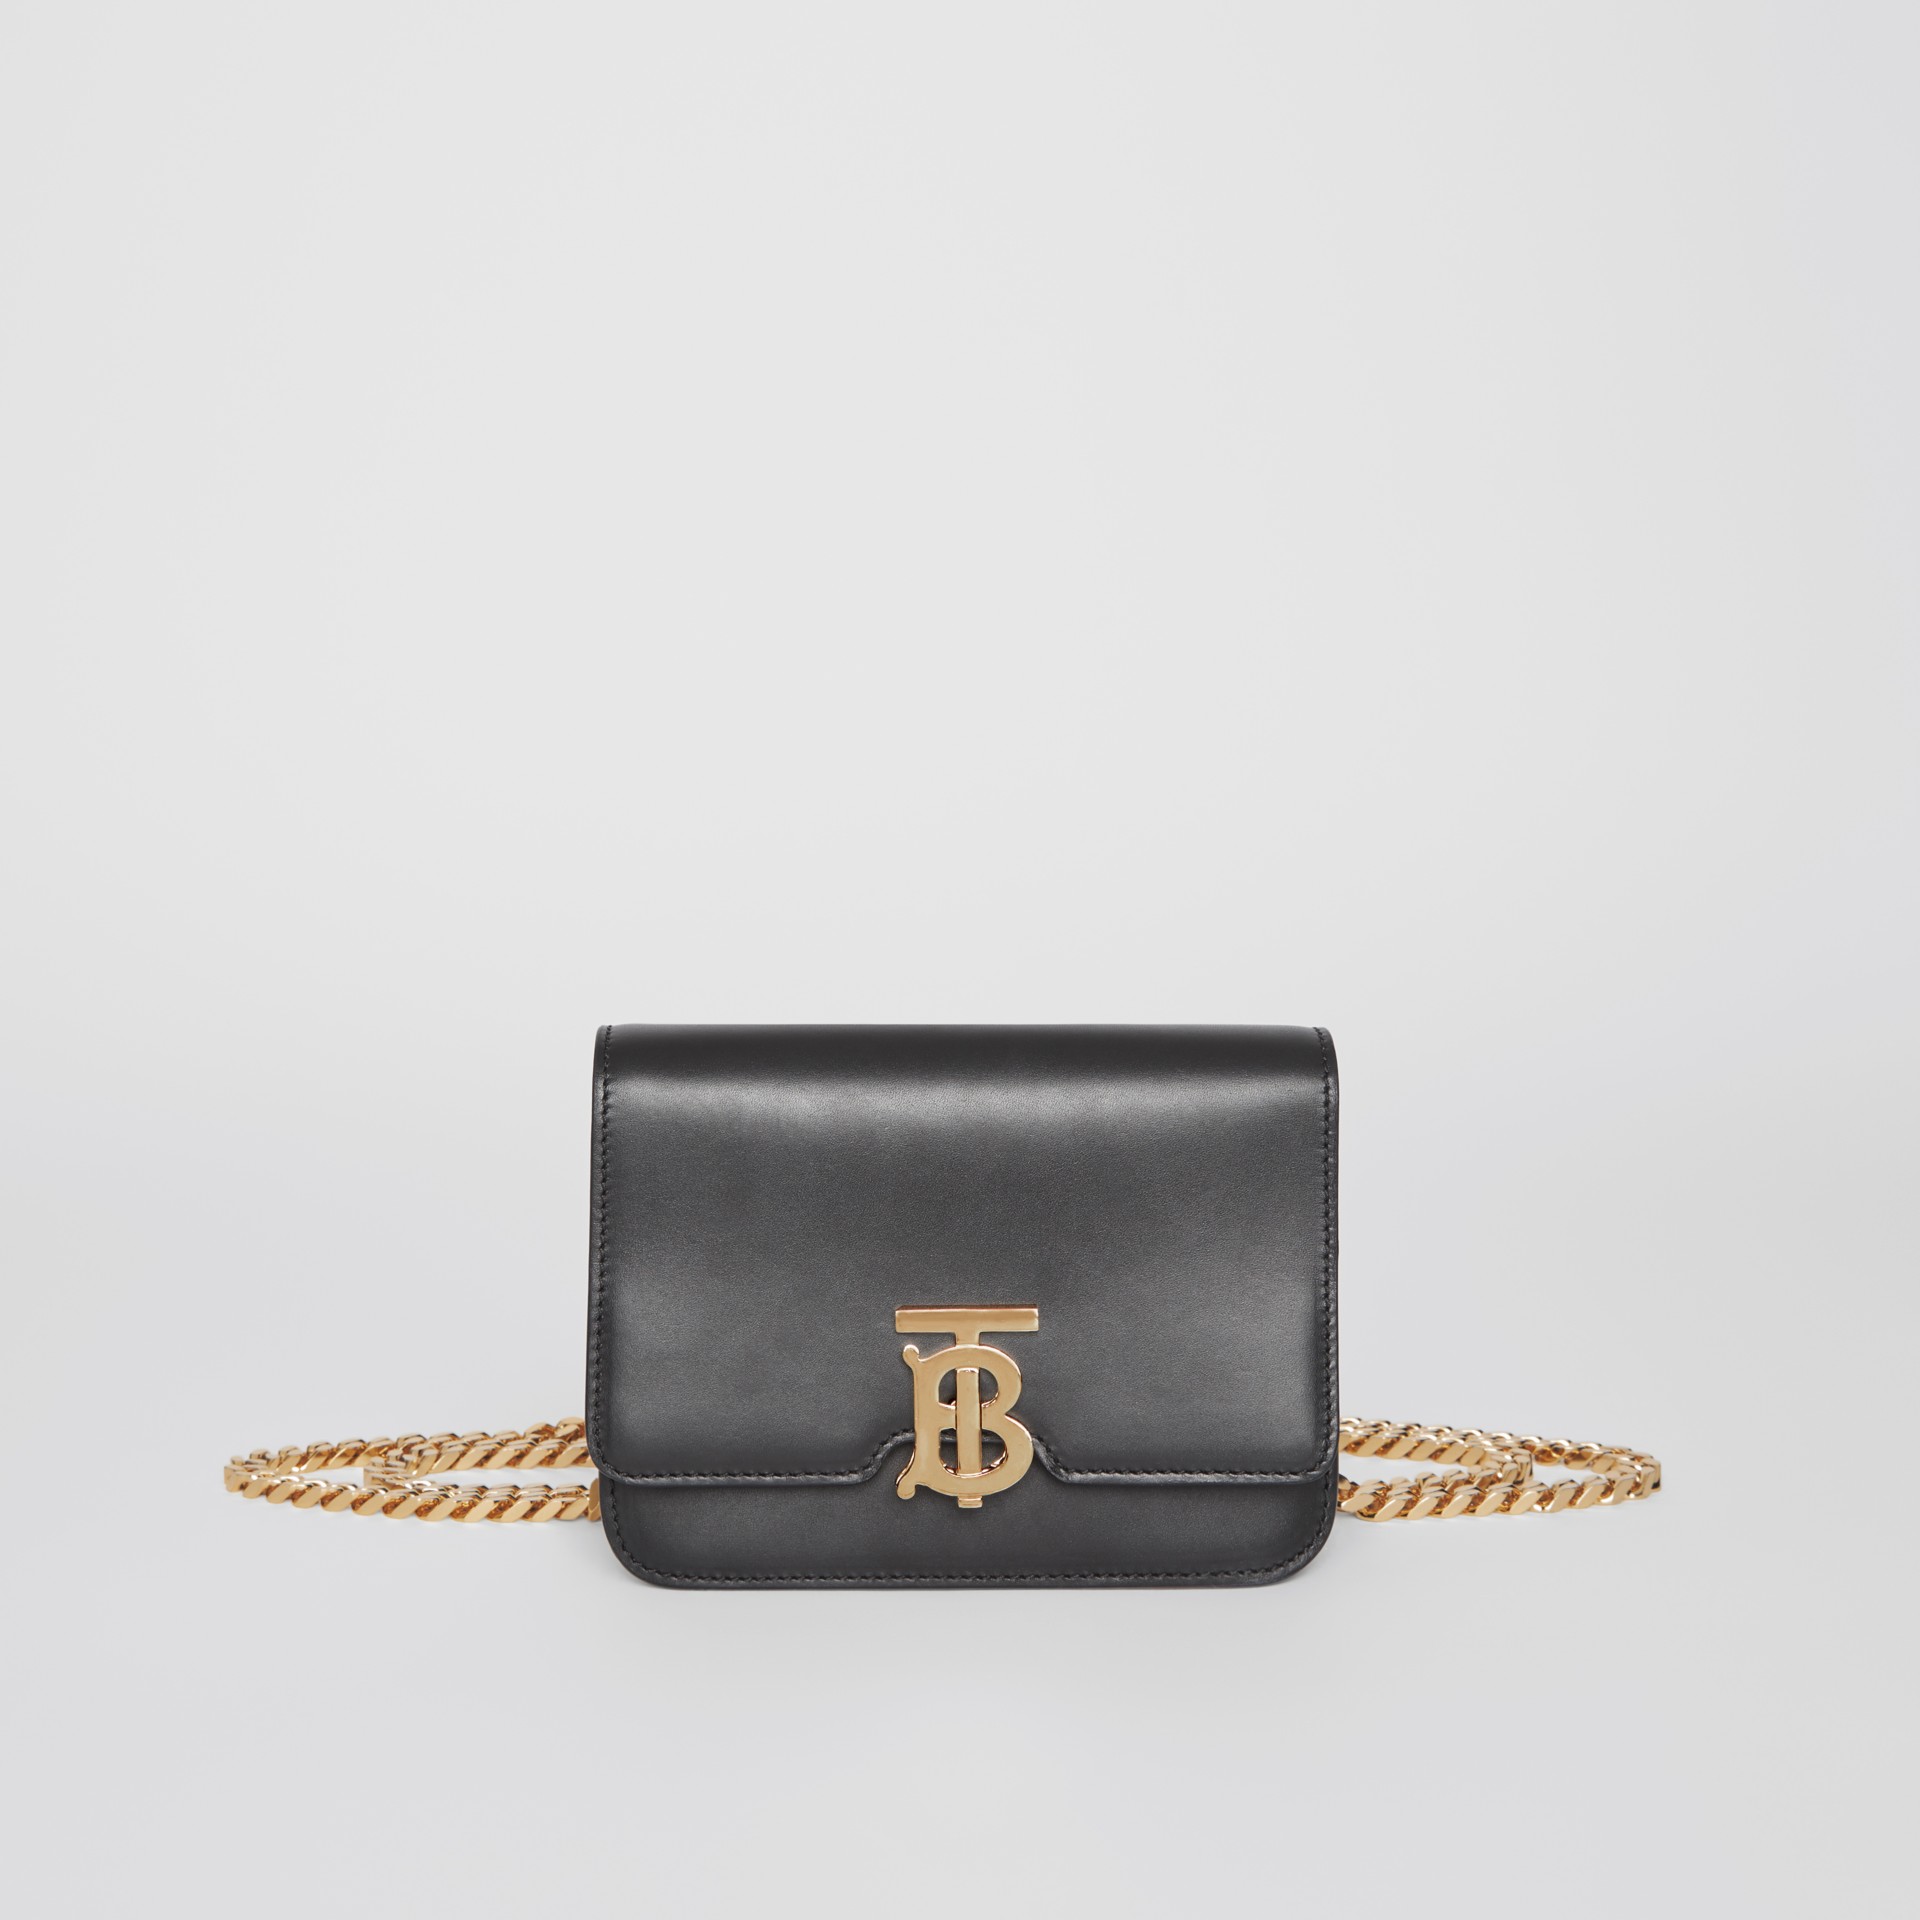 Belted Leather TB Bag in Black - Women | Burberry United Kingdom